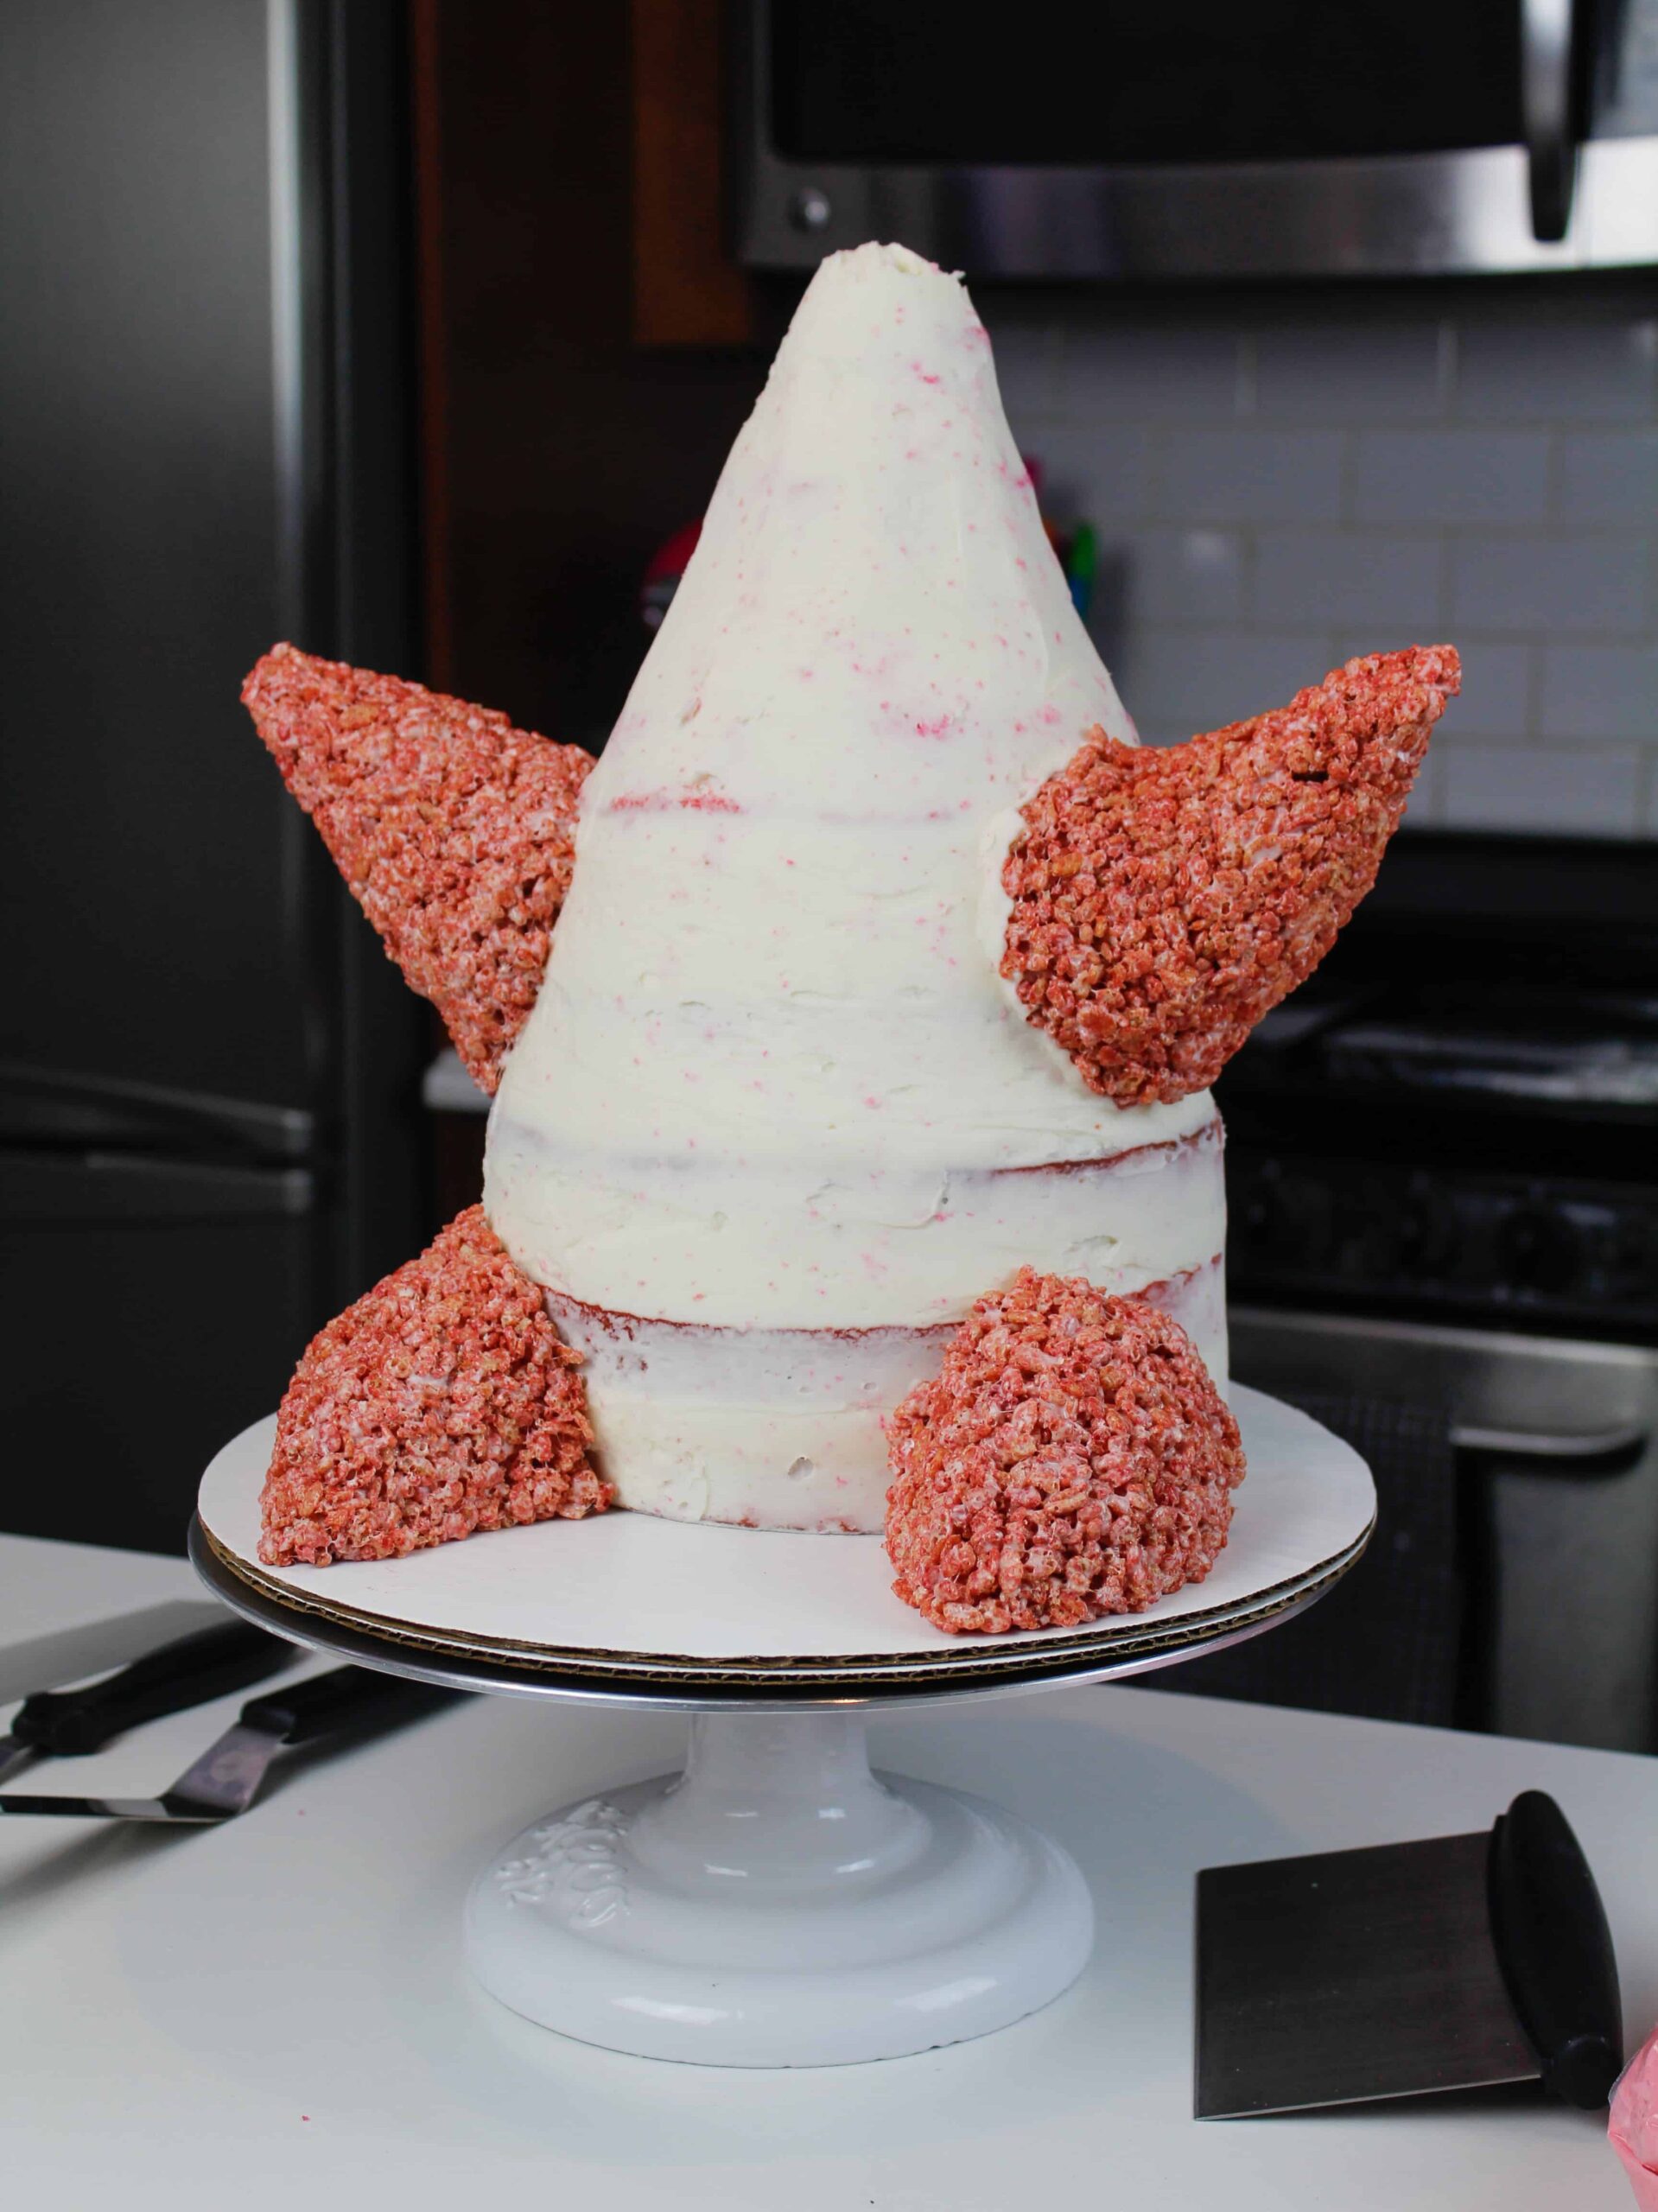 image of cake decorating rice krispies added to a patrick star cake to make his arms and legs